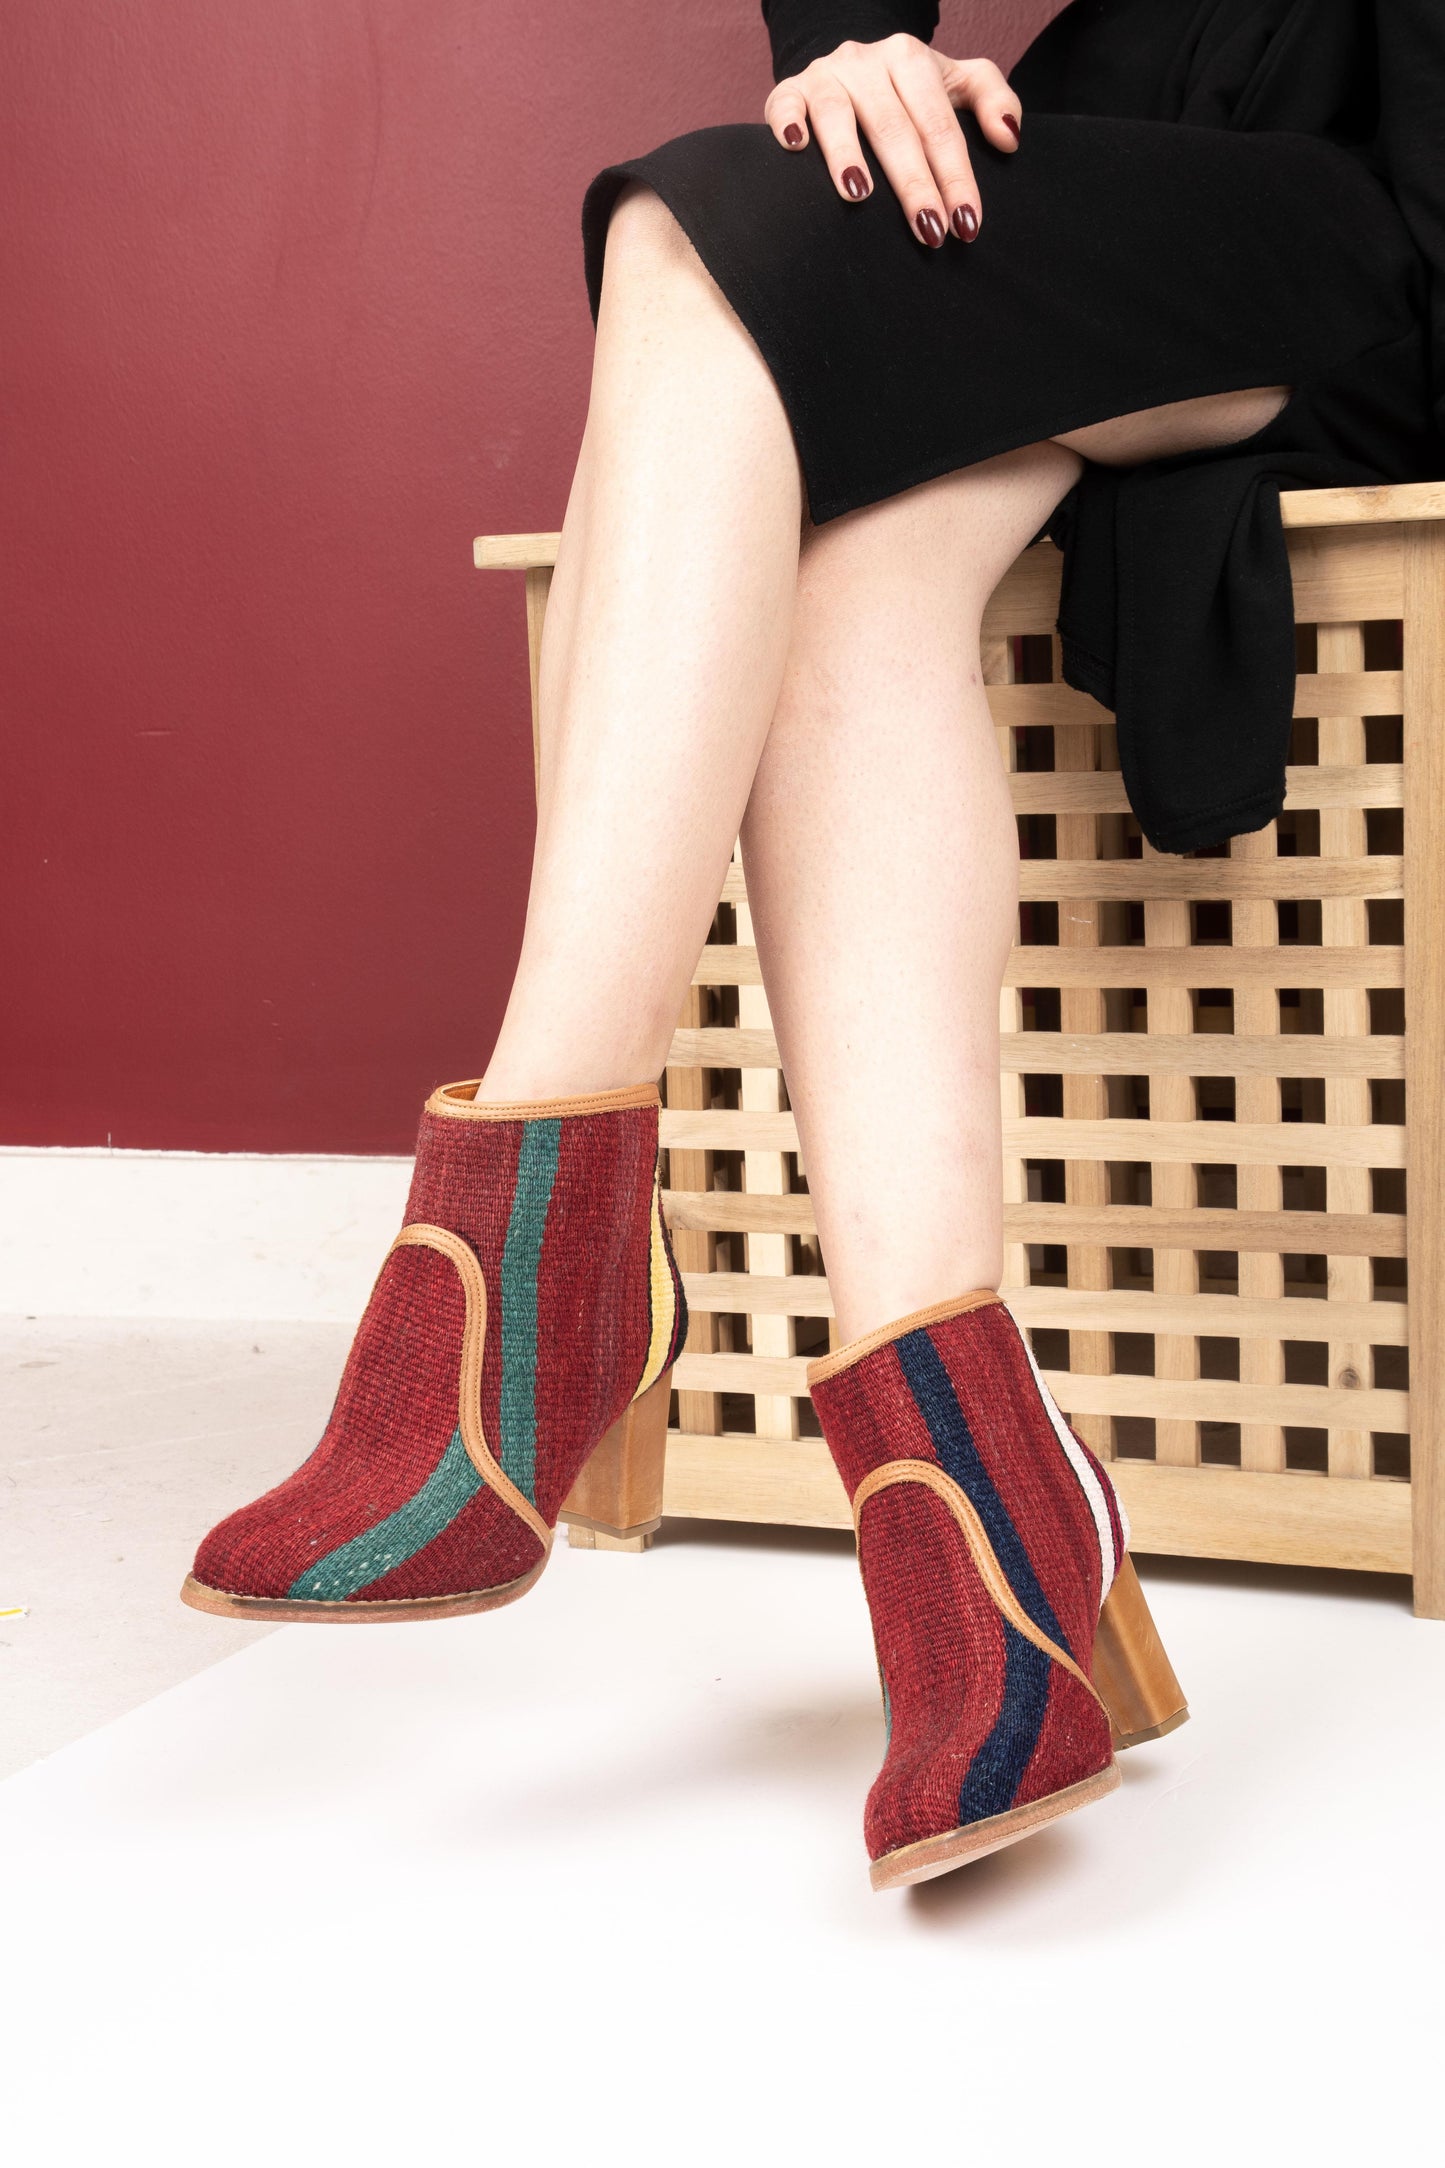 Ethnic Woman Heel Ankle Boot Crafted From Handmade Kilim and Real Leather Size 6.5 - Base Width: 7.5 cm - Base Length: 21.5 cm - Heel: 7 cm